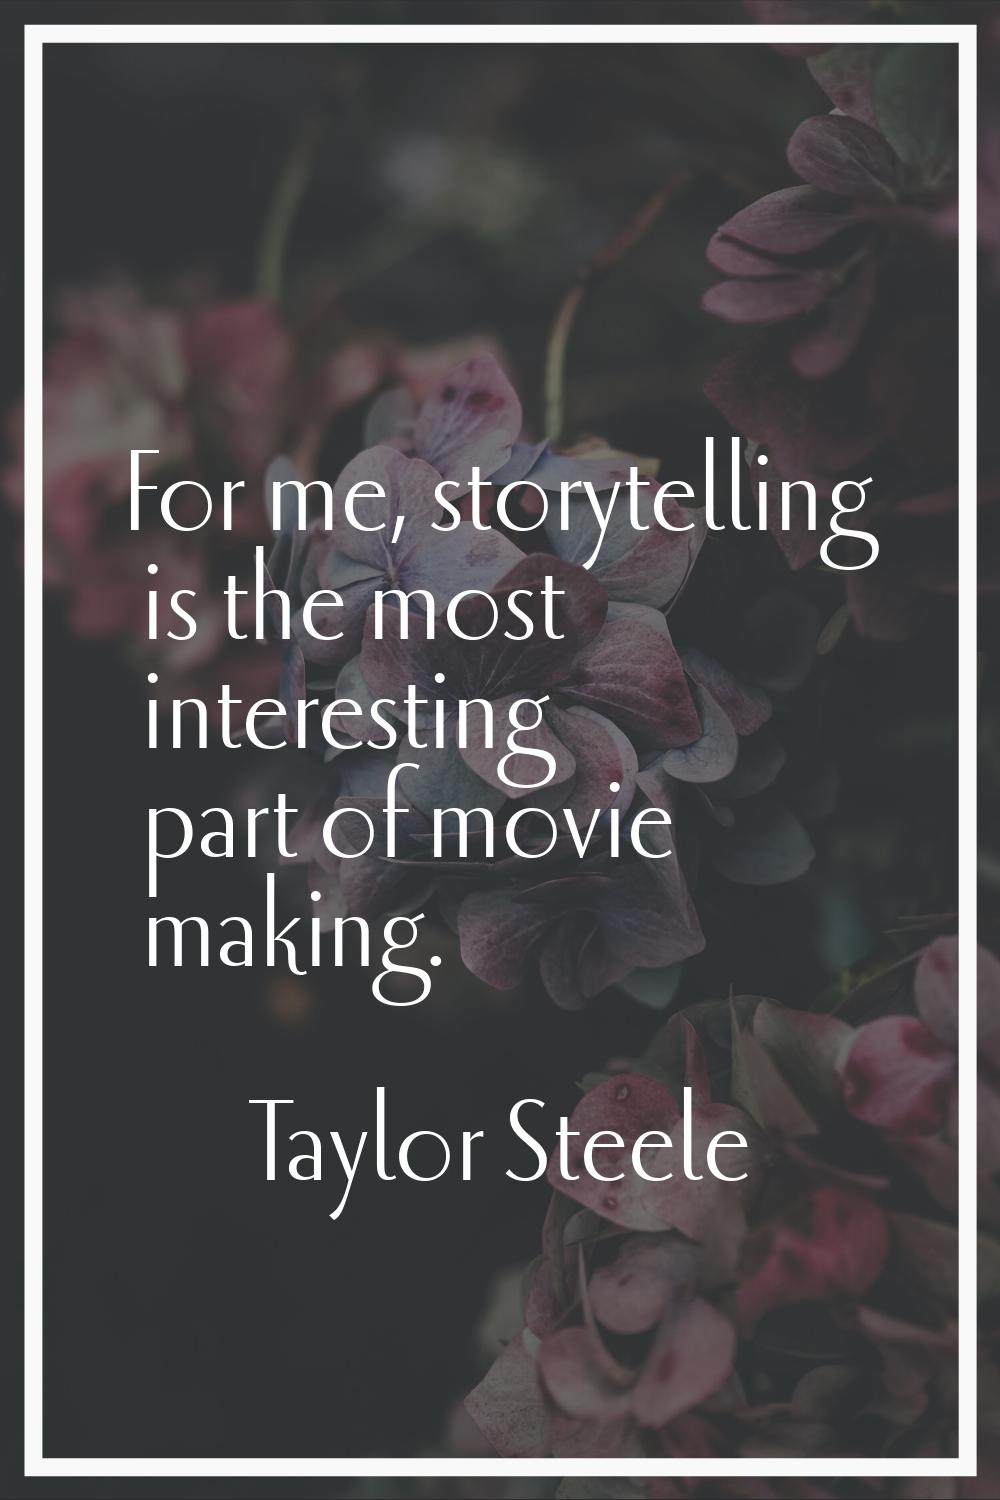 For me, storytelling is the most interesting part of movie making.